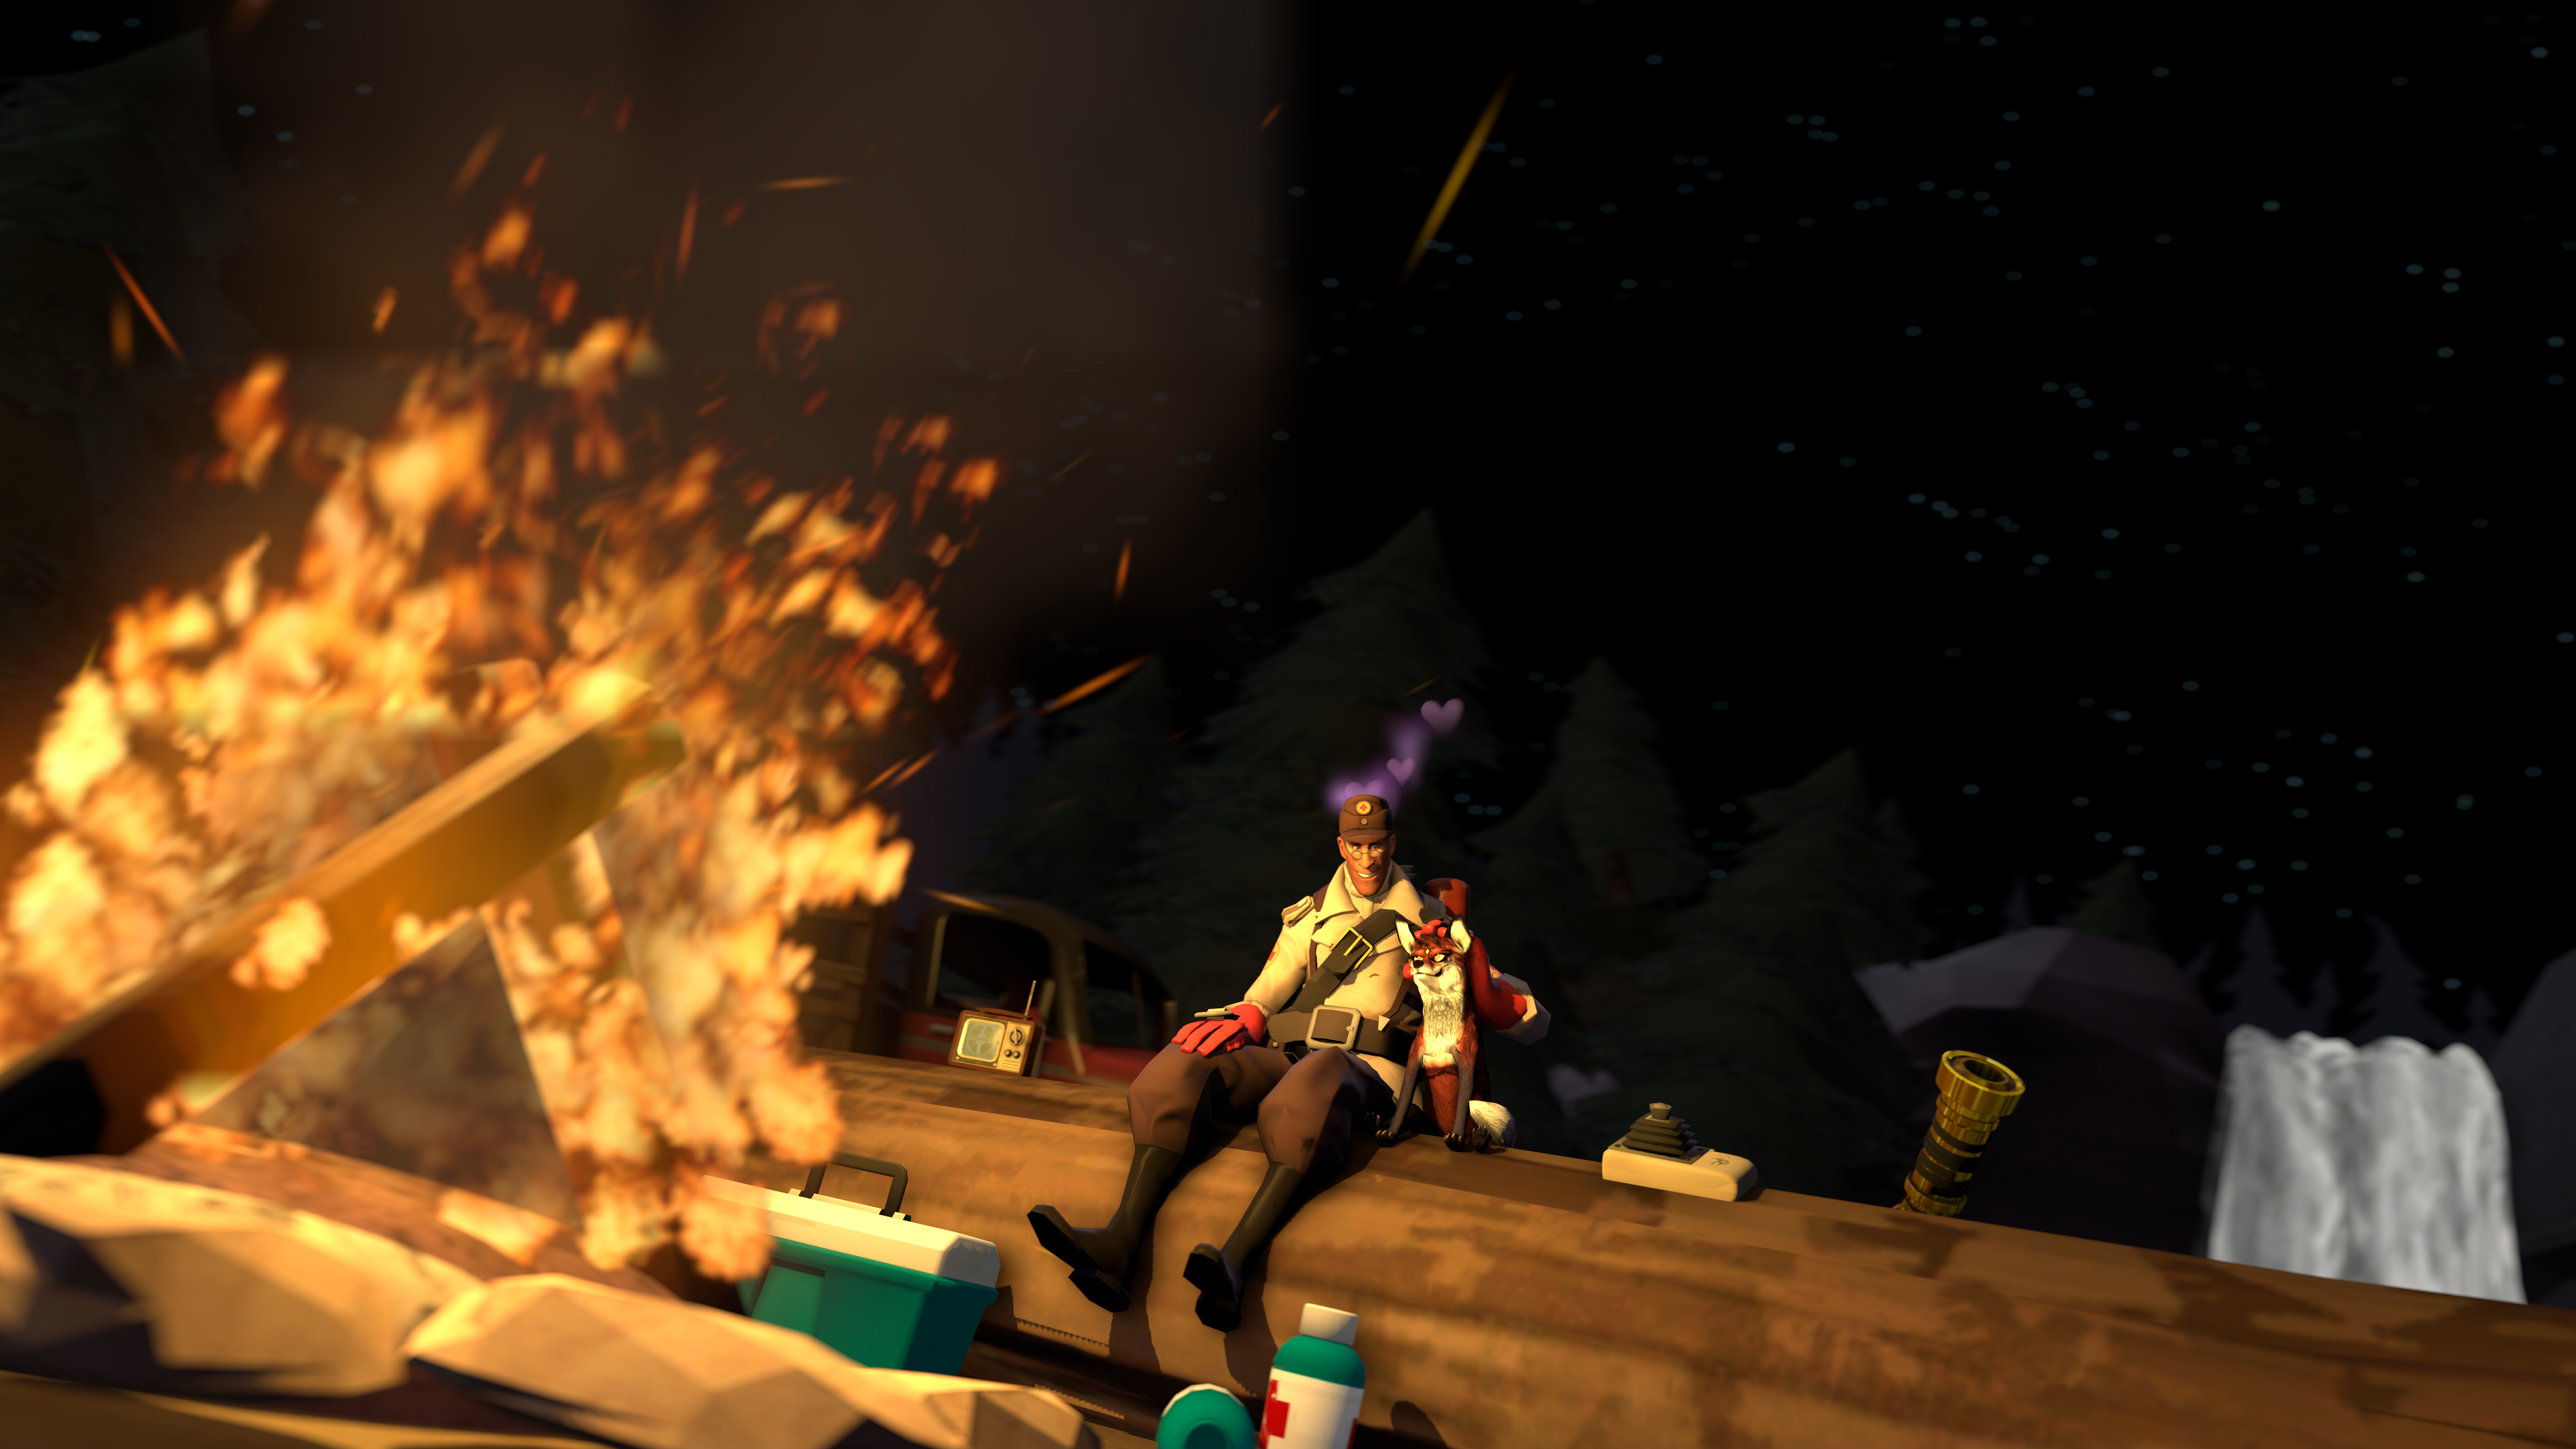 Two partnes at campfire (SFM)